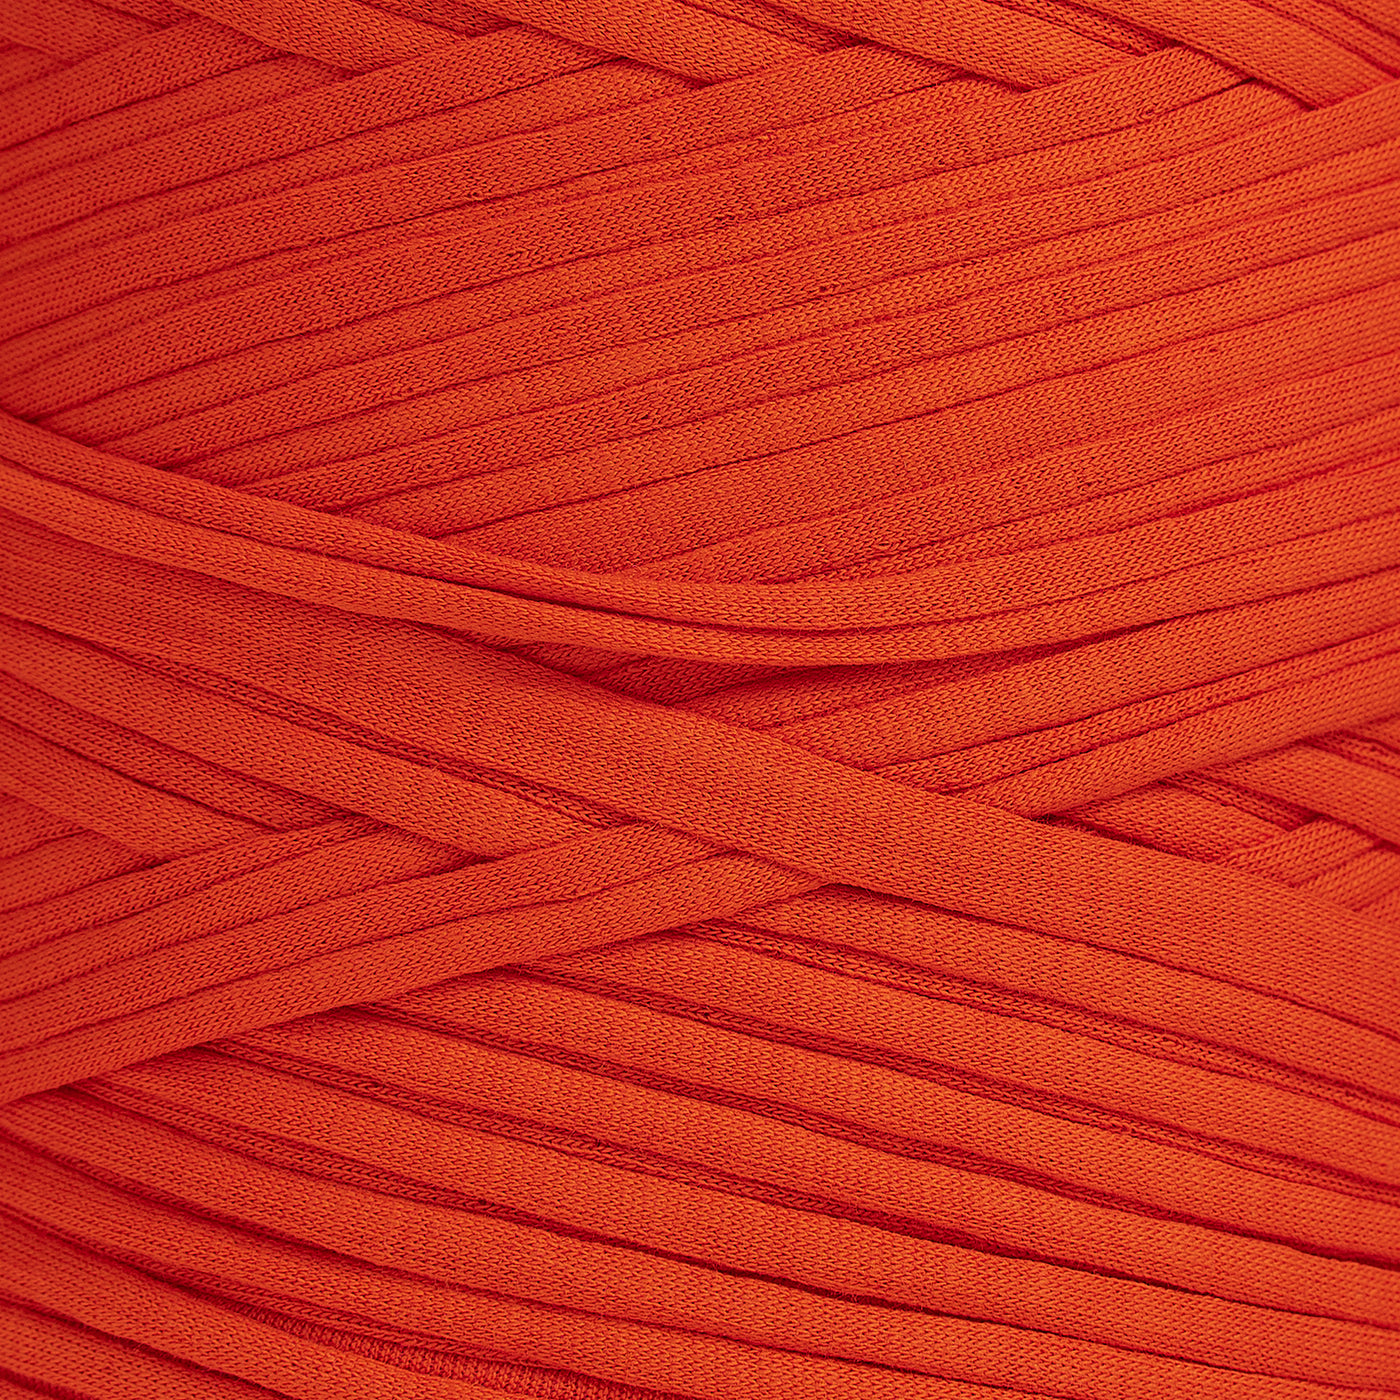 Recycled T-Shirt Fabric Yarn - Orange Color